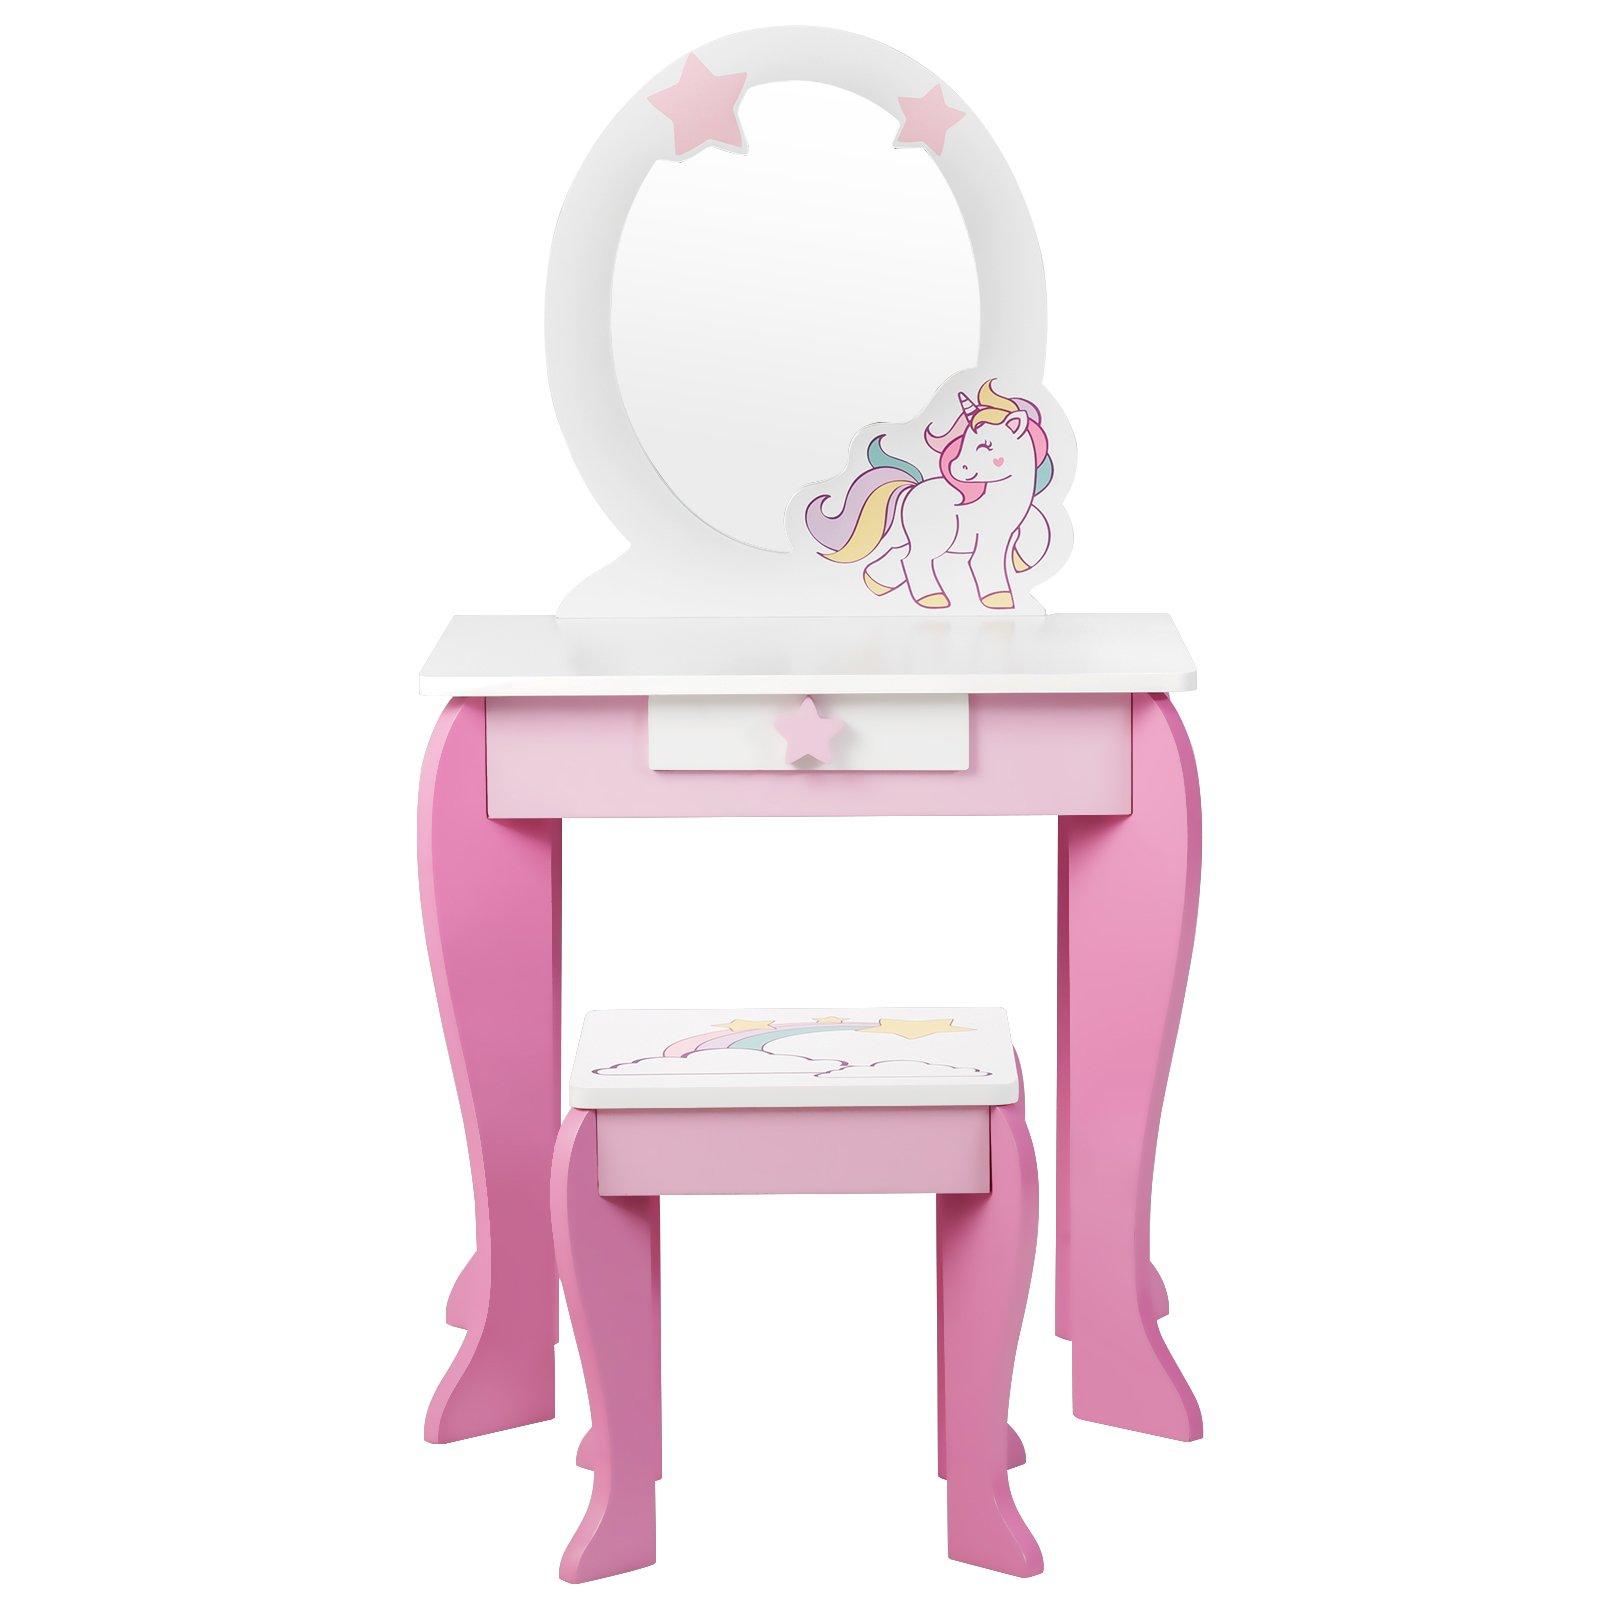 2 in 1 Kids Vanity Table and Chair Set Princess Makeup Dressing Table Writing